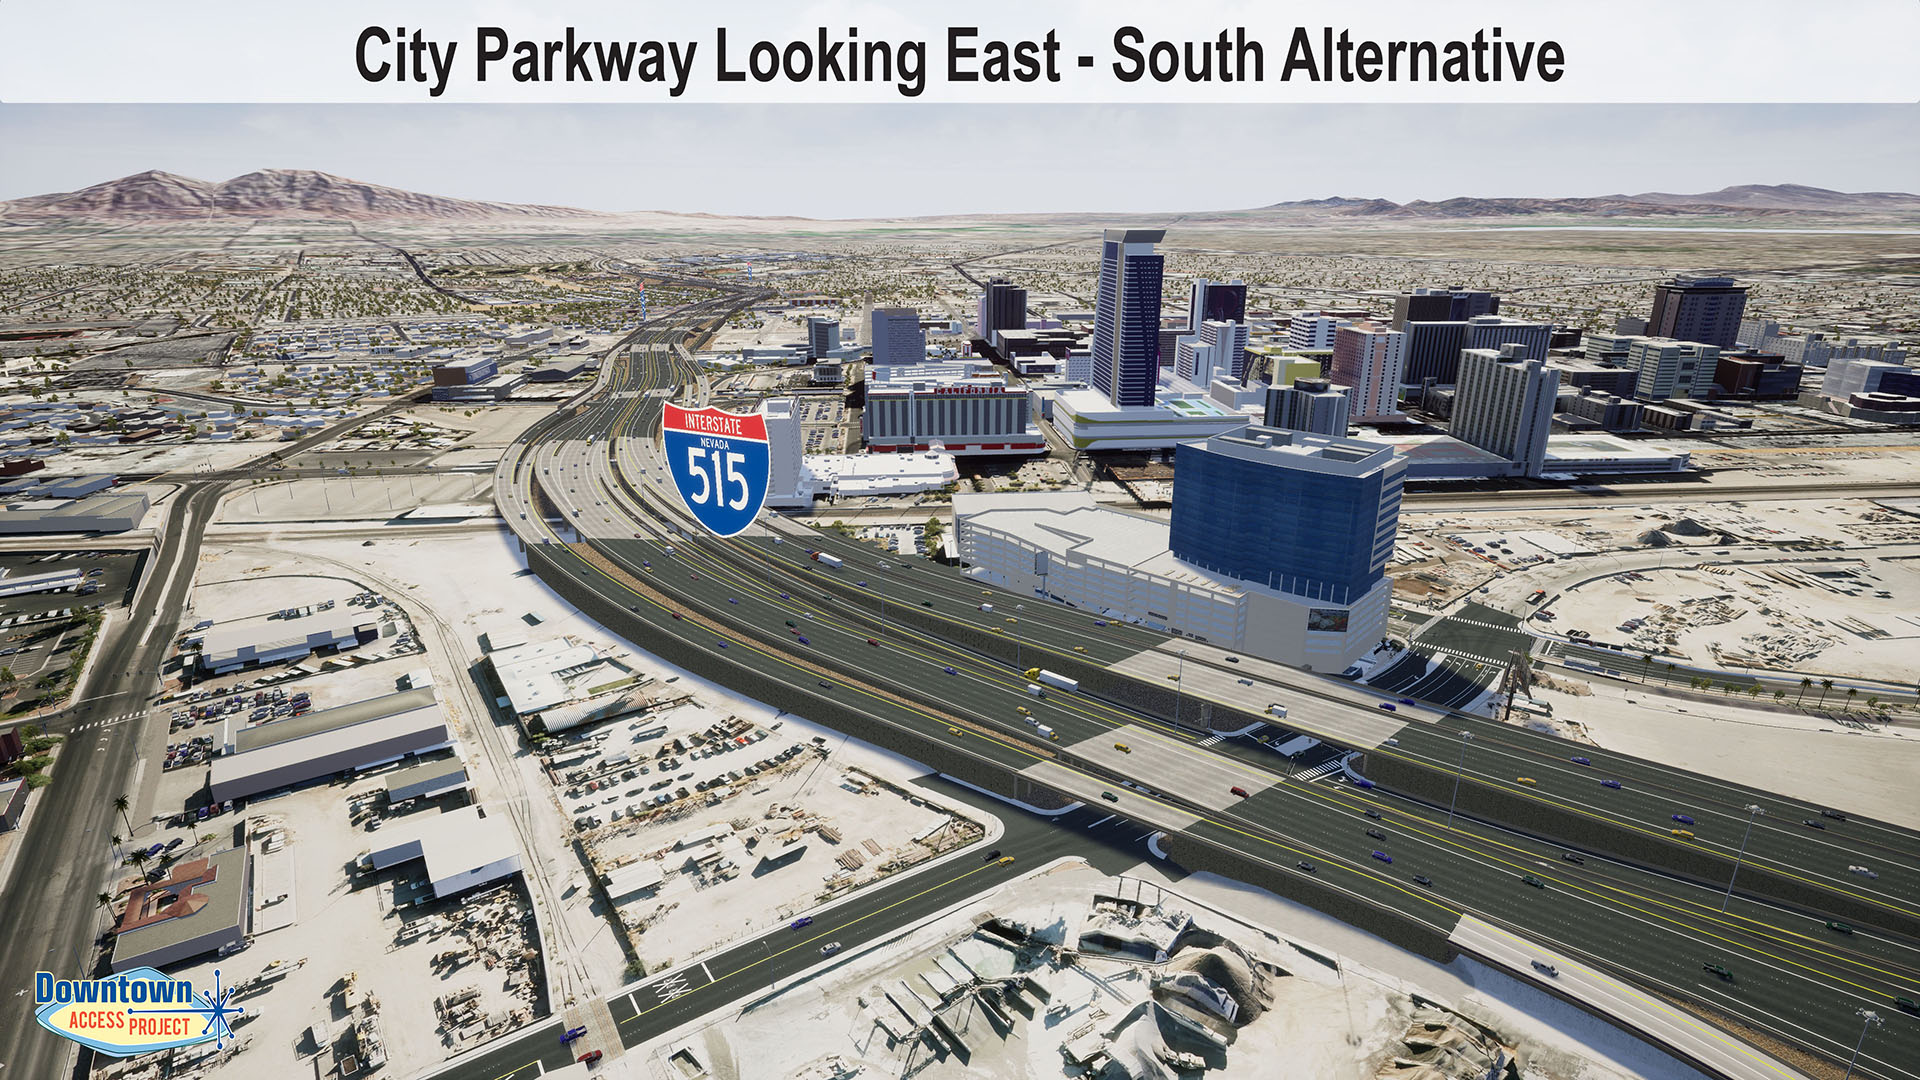 City Parkway Looking East - South Alternative